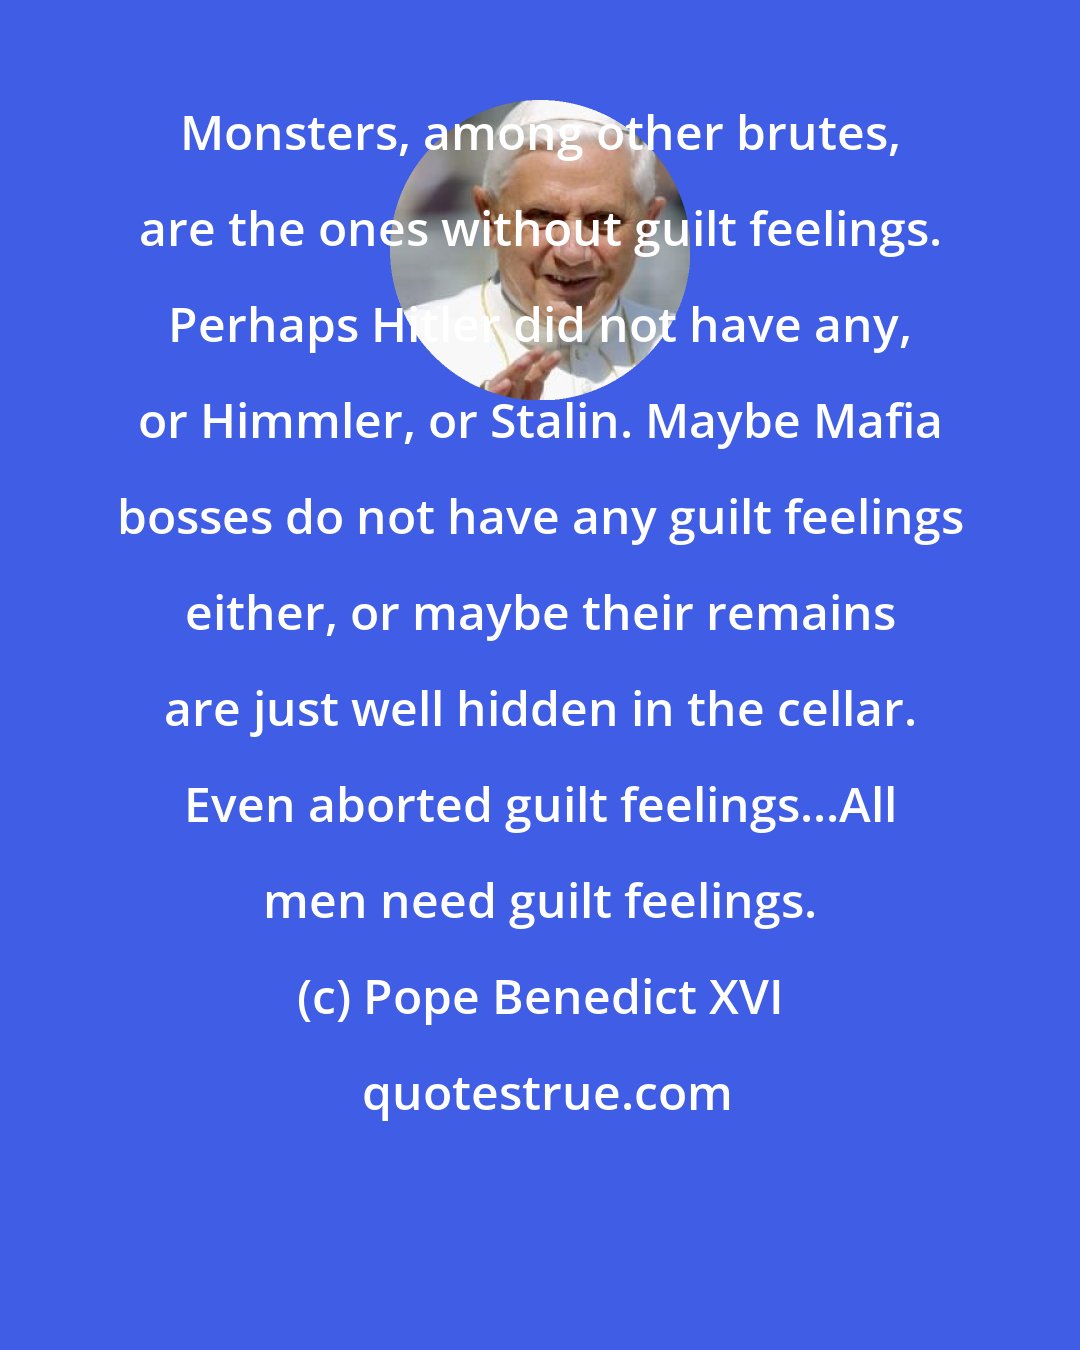 Pope Benedict XVI: Monsters, among other brutes, are the ones without guilt feelings. Perhaps Hitler did not have any, or Himmler, or Stalin. Maybe Mafia bosses do not have any guilt feelings either, or maybe their remains are just well hidden in the cellar. Even aborted guilt feelings...All men need guilt feelings.